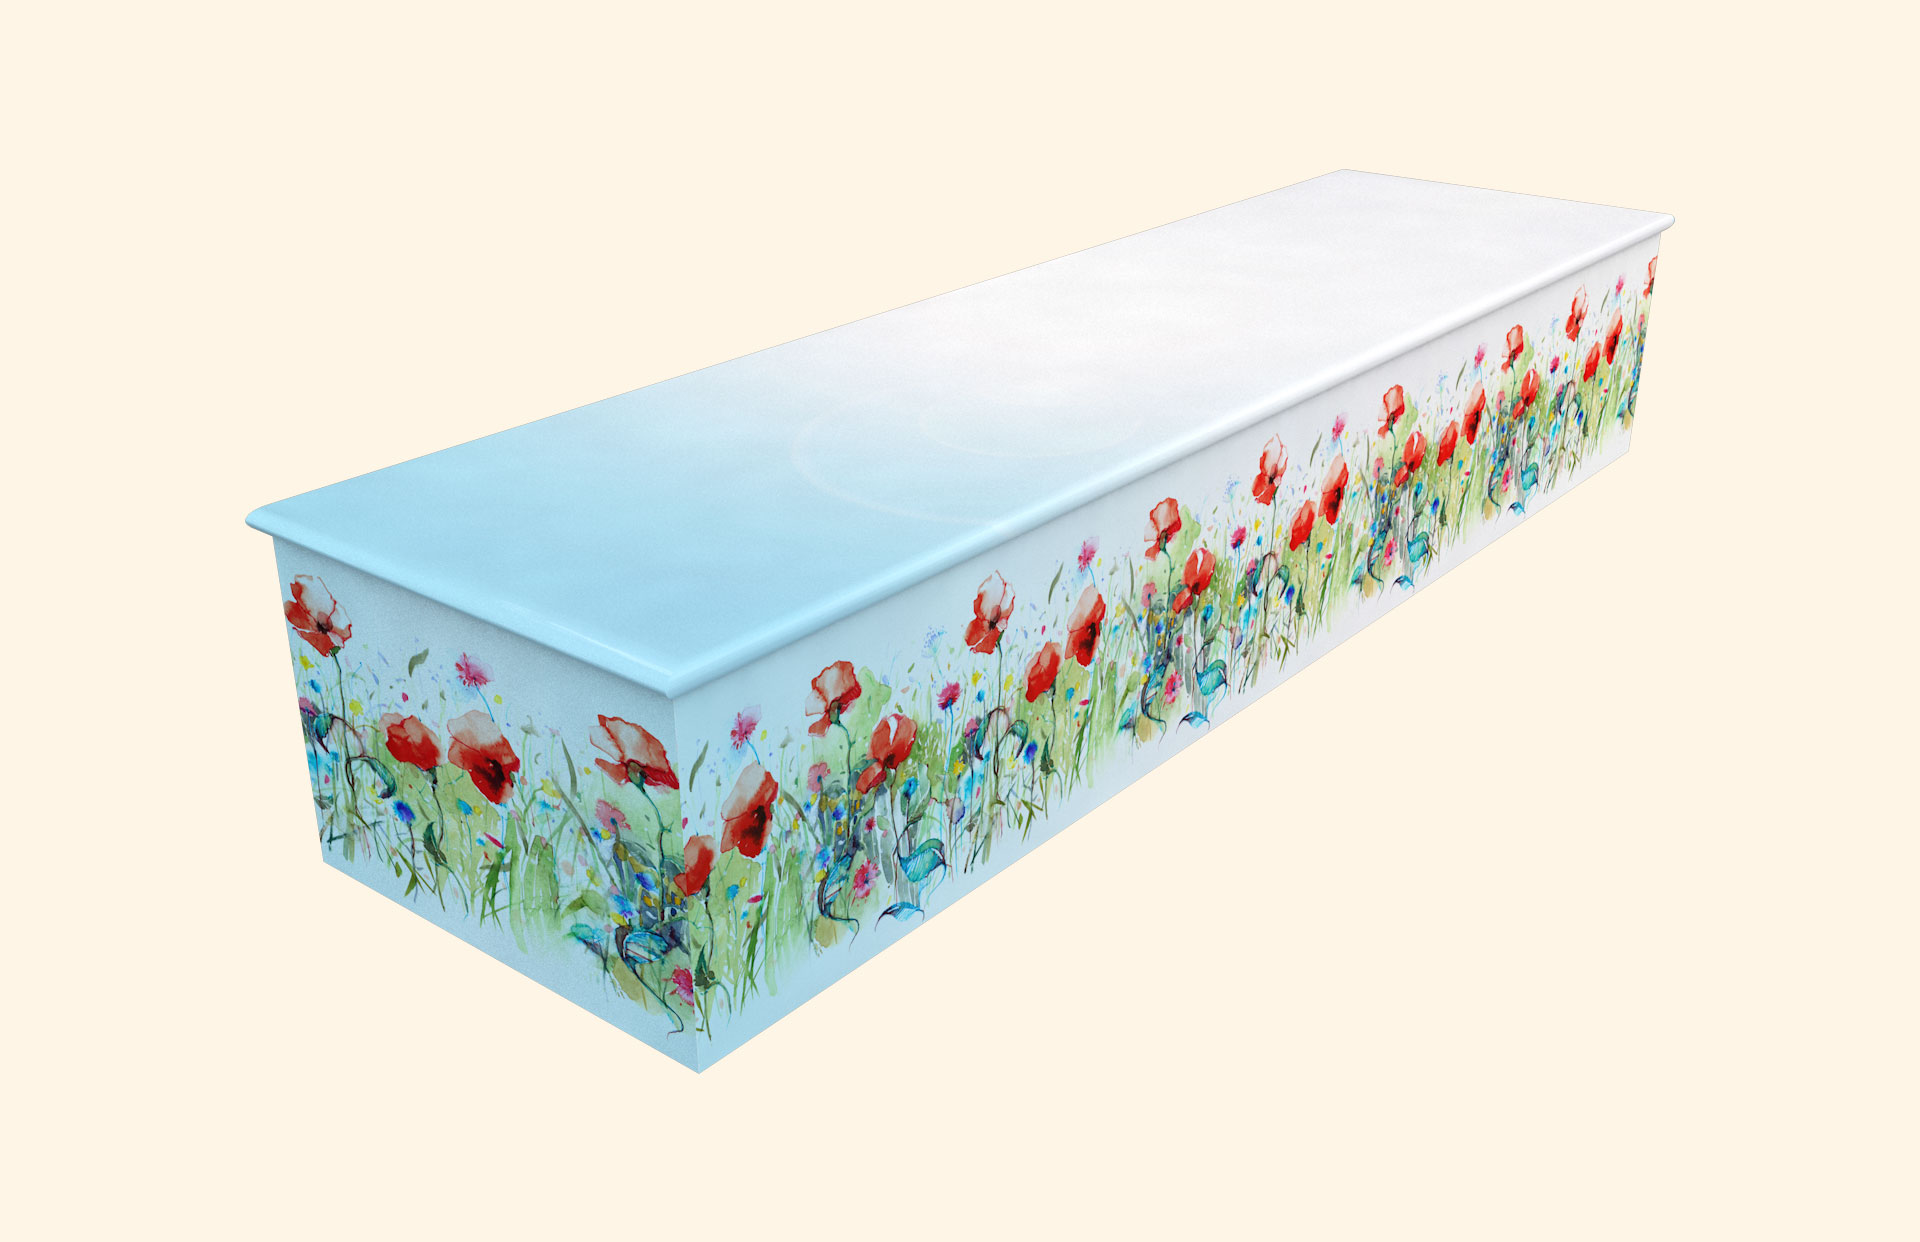 Watercolour Poppies in blue on a wooden casket